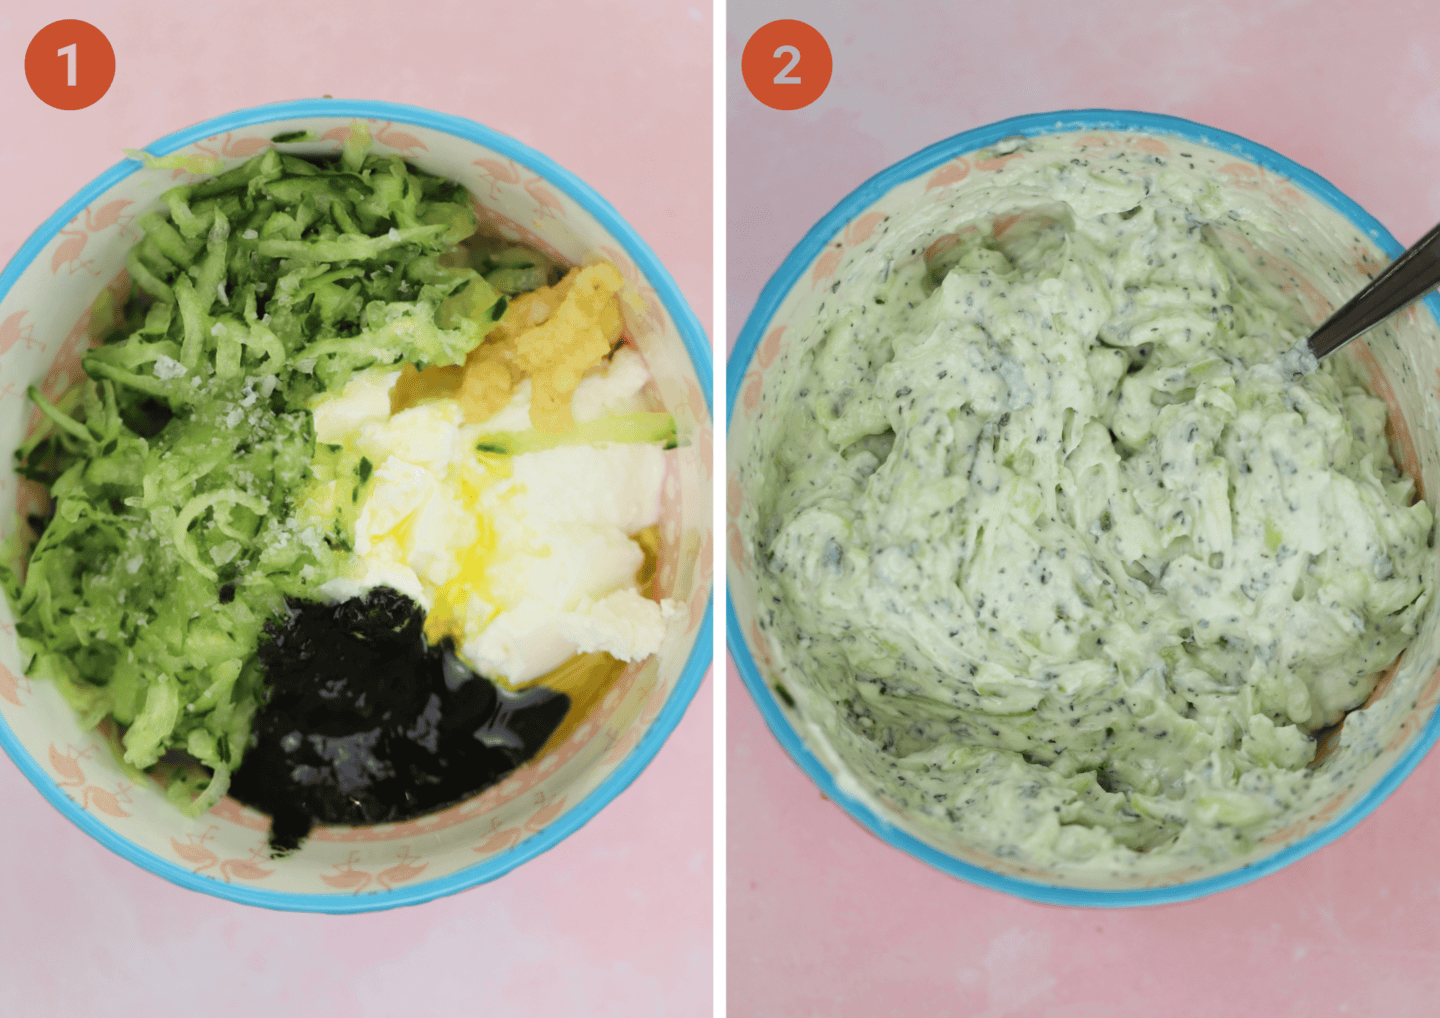 Homemade tzatziki before and after mixing.